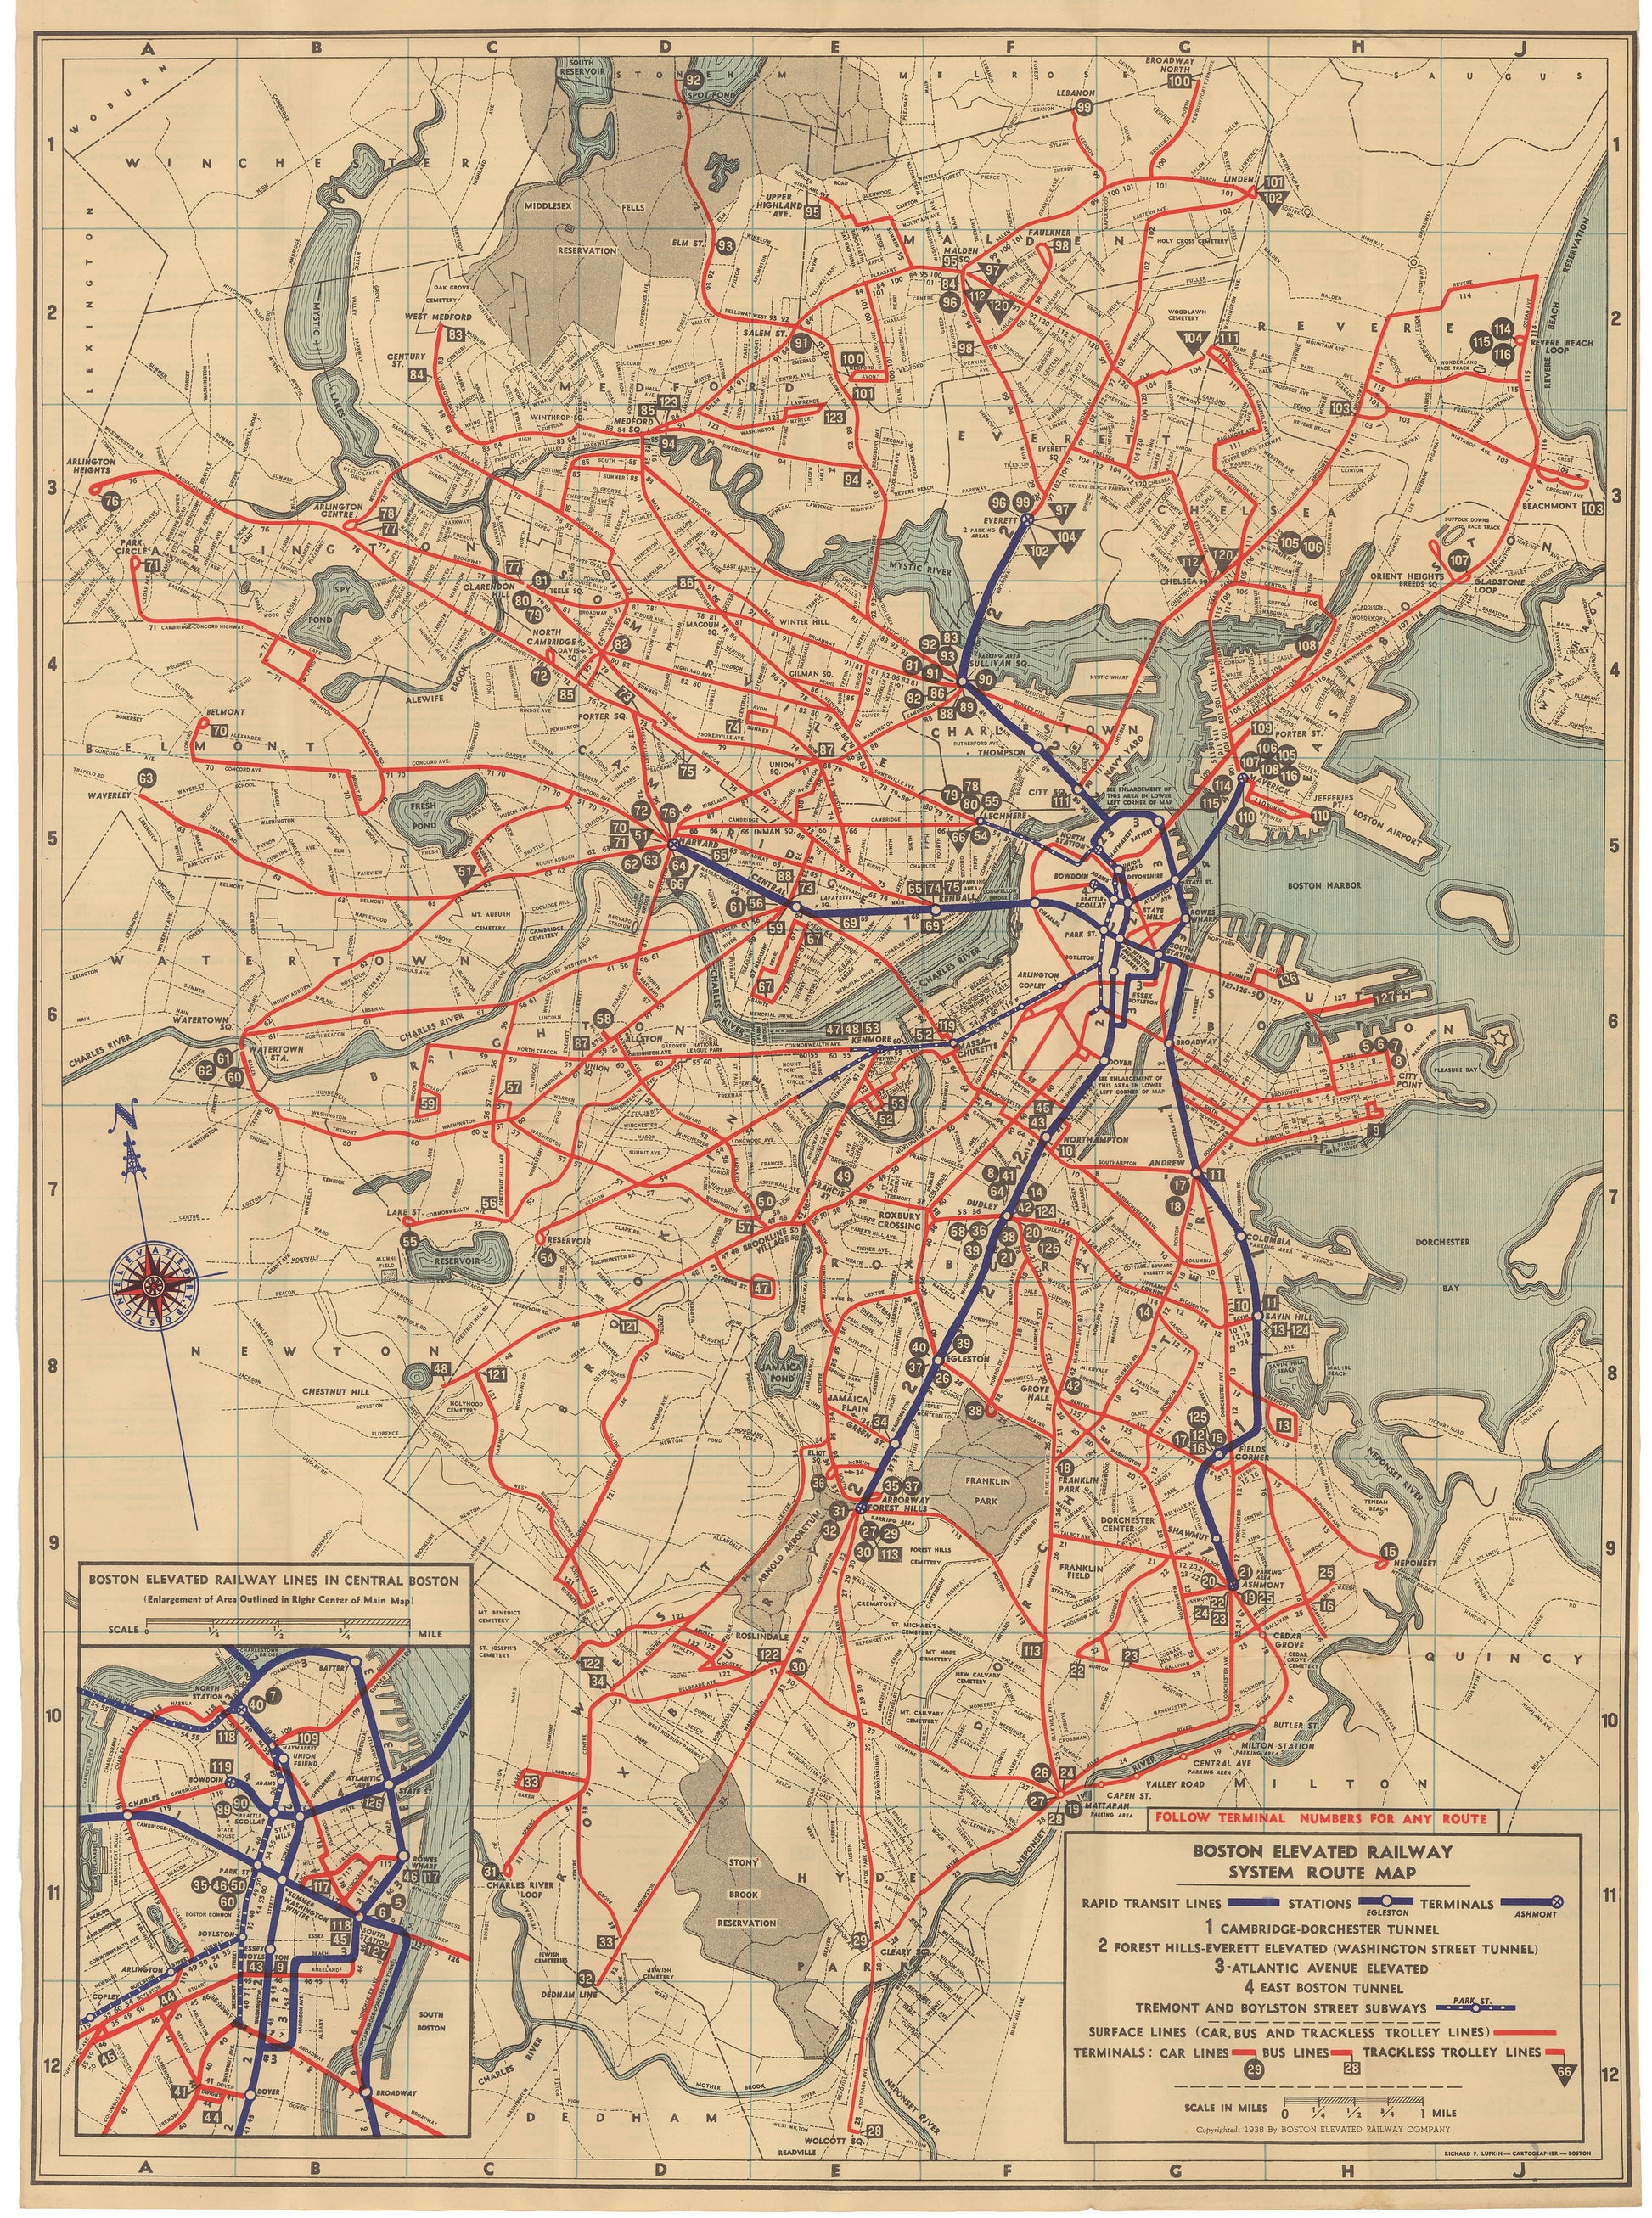 1938 Boston Elevated Railway Co. System Map No. 3